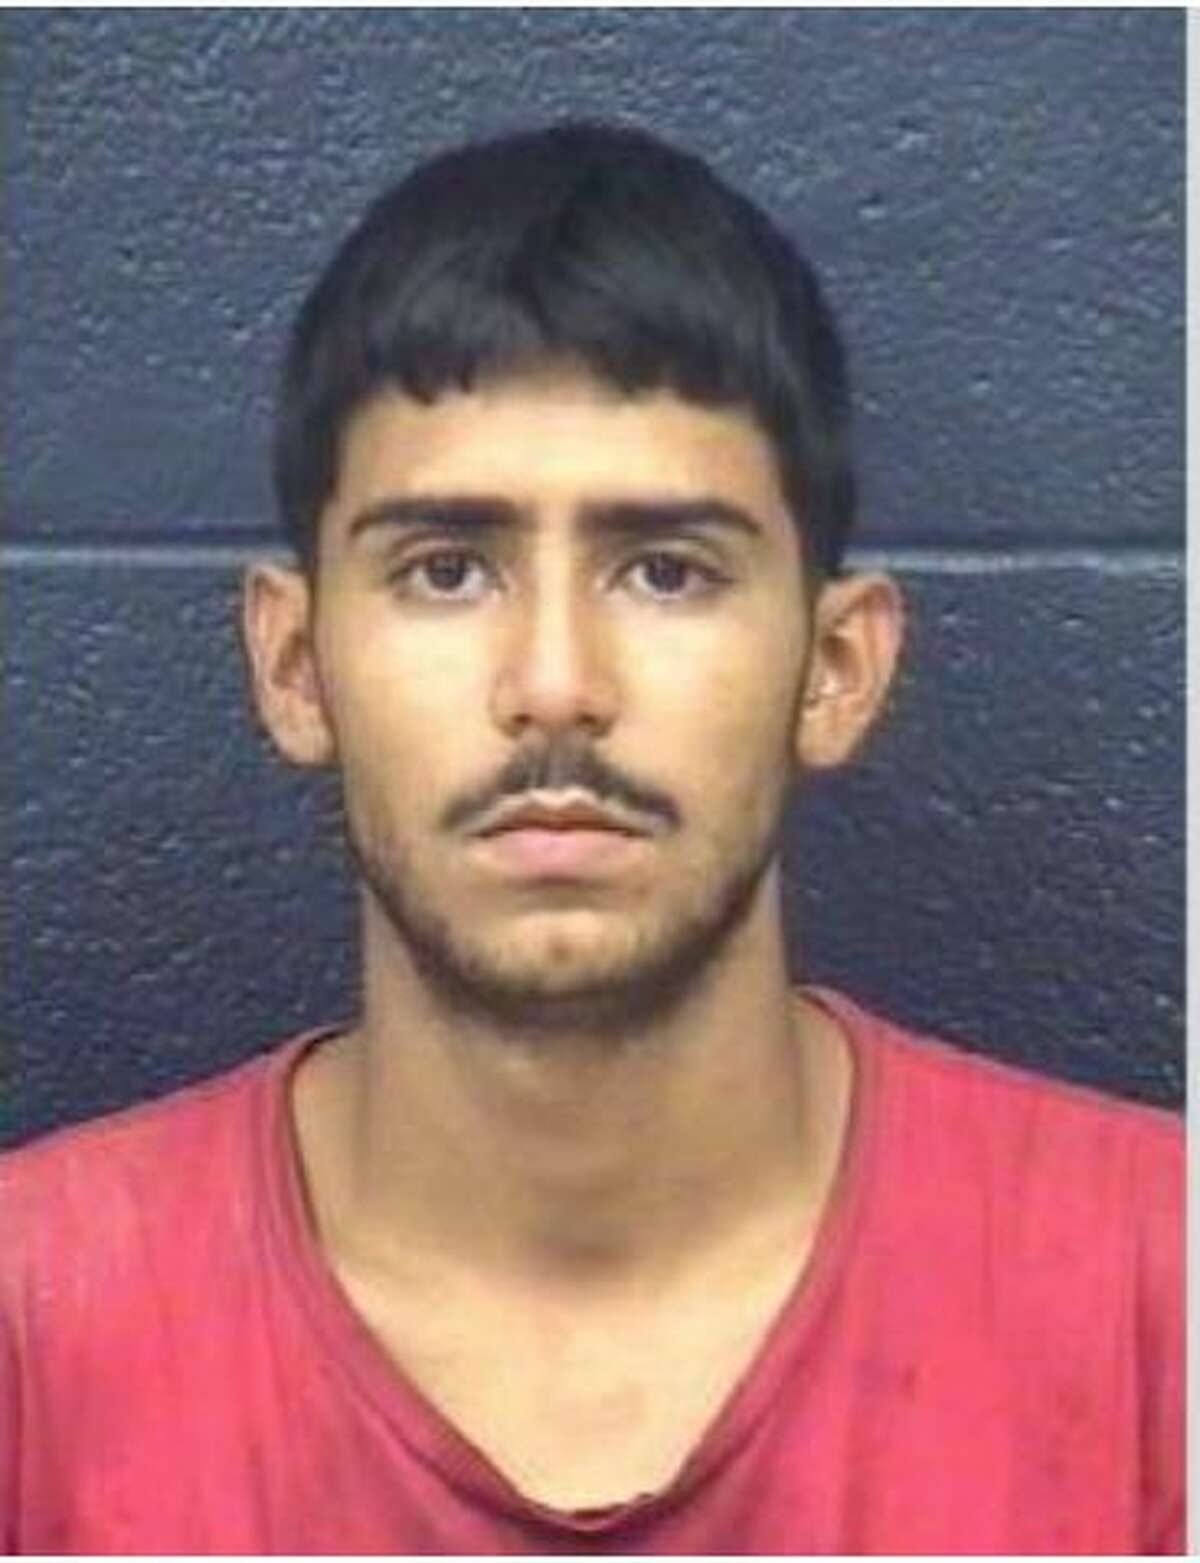 Jonathan Ornelas was charged with driving while intoxicated.